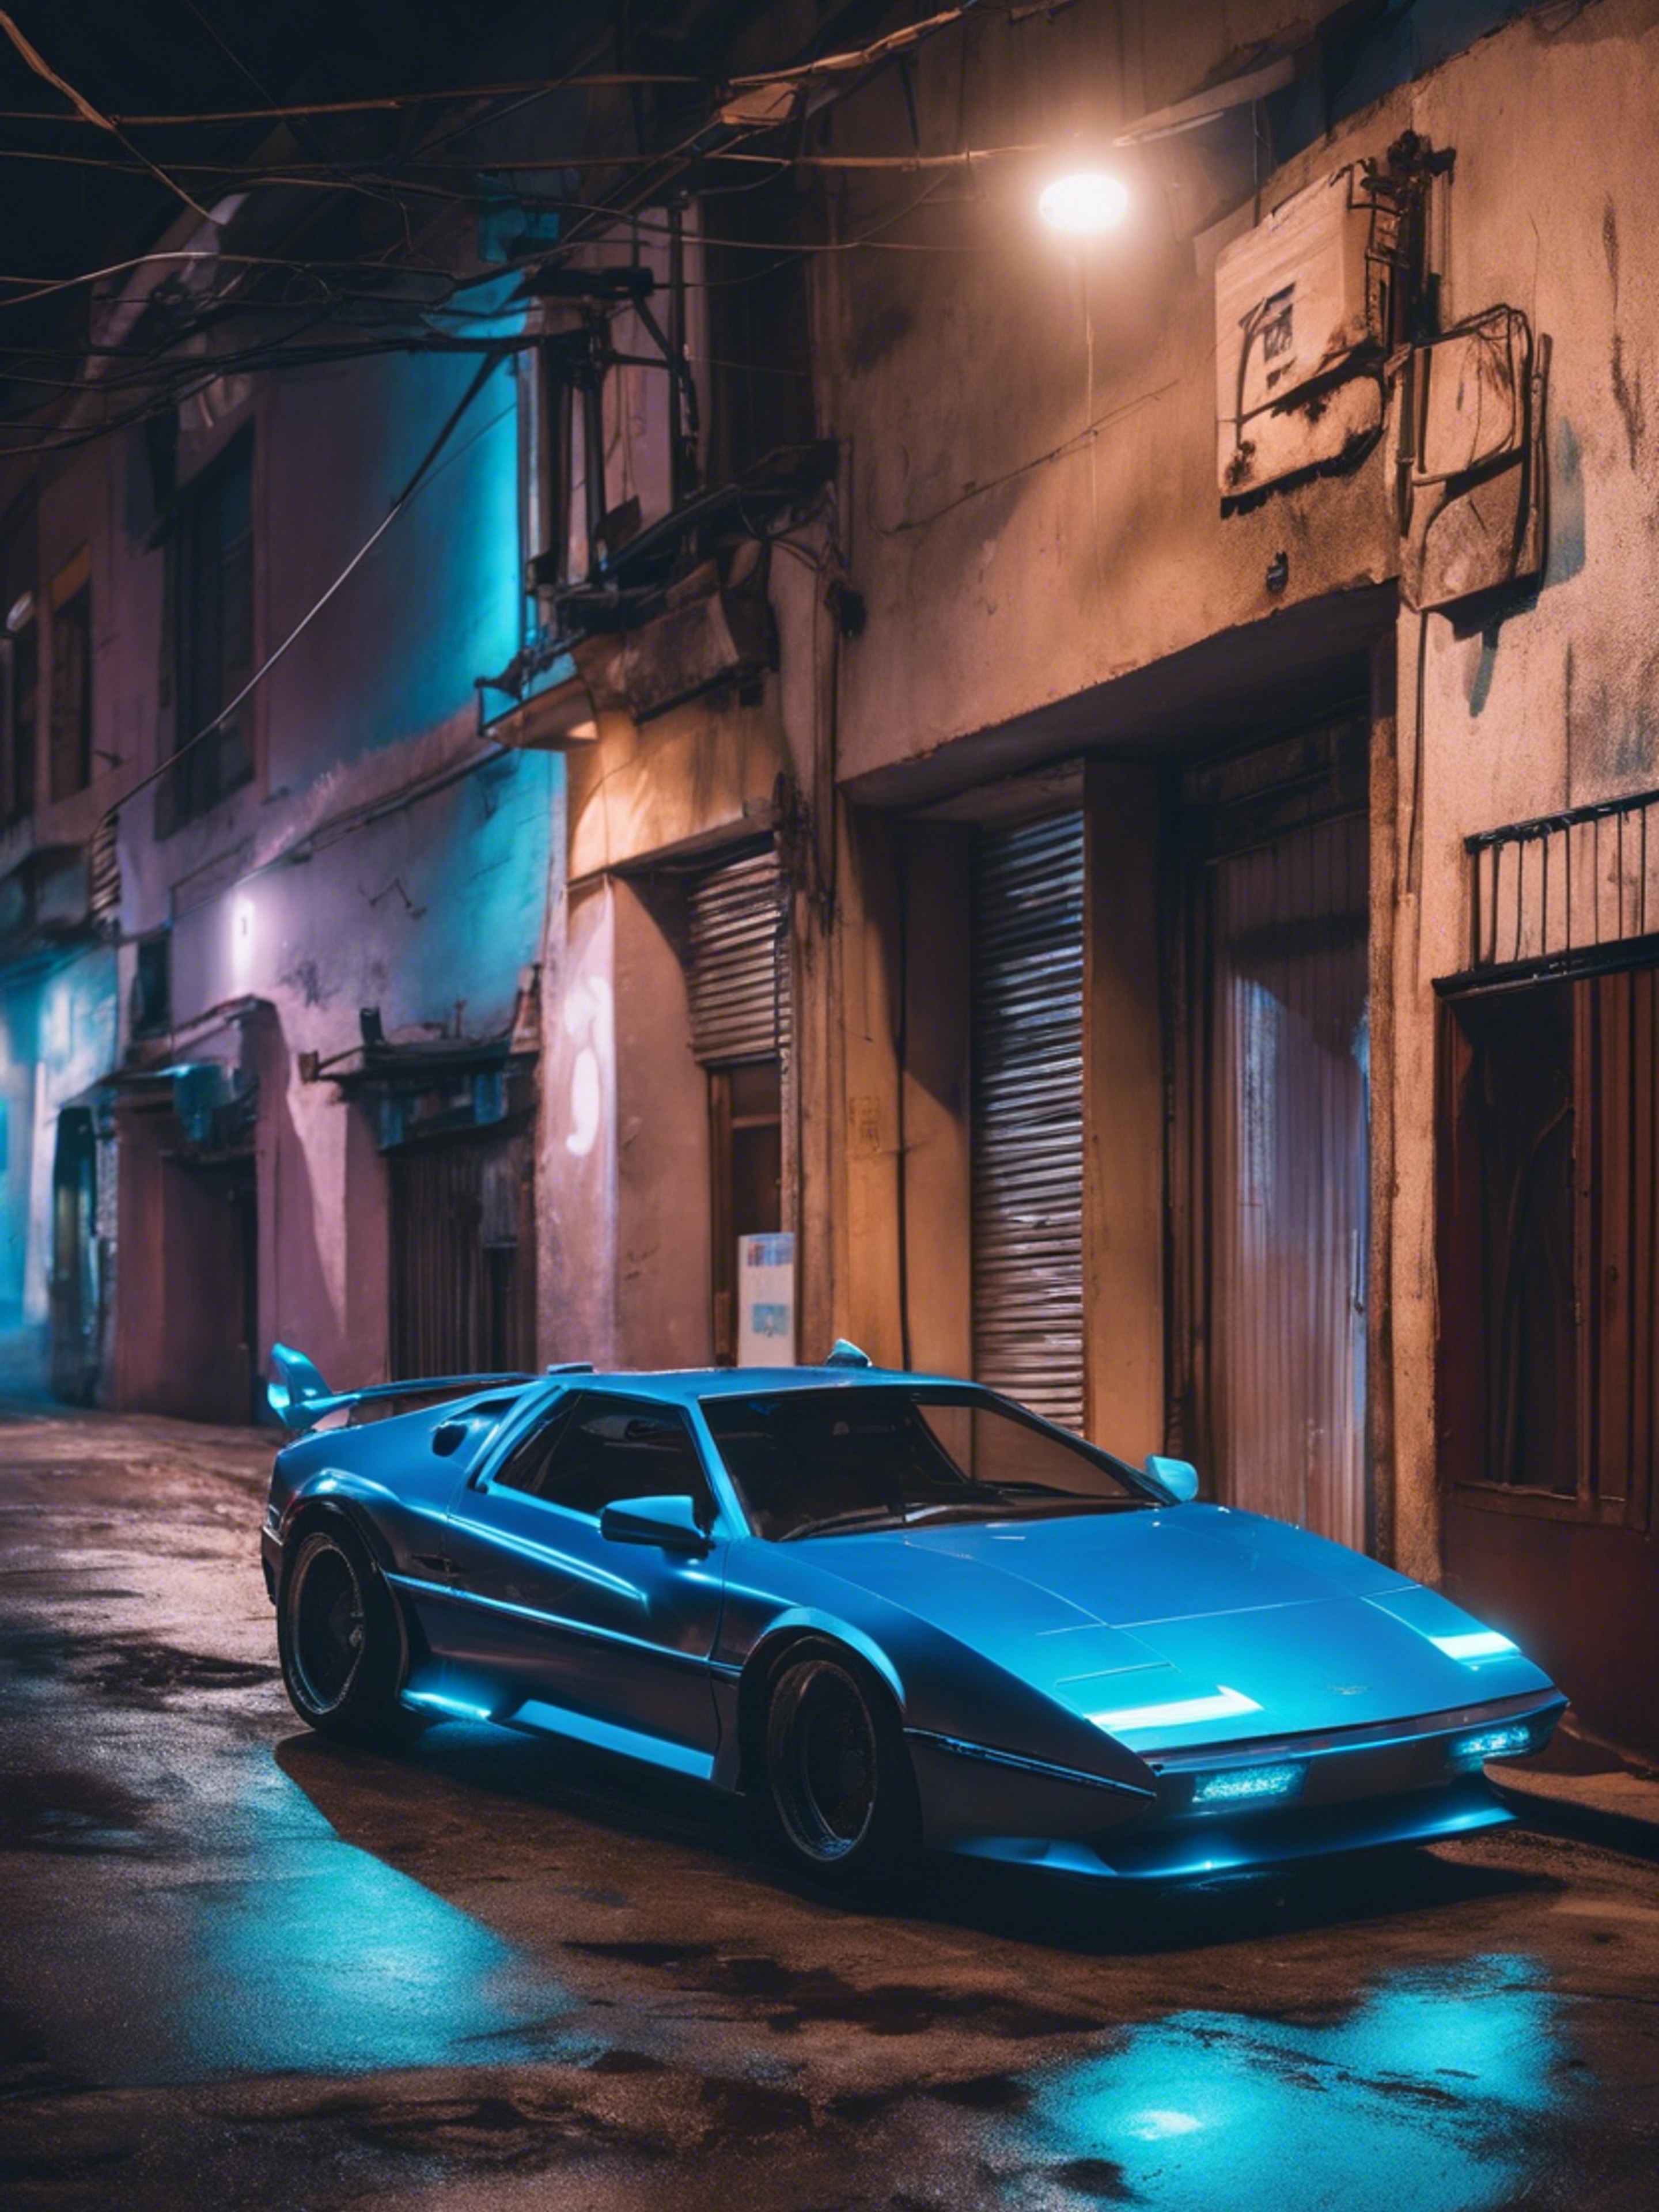 A cyberpunk themed sports car glowing with neon blue underlights parked in a dim alley. Tapéta[b442527eec5a4d00a6f1]